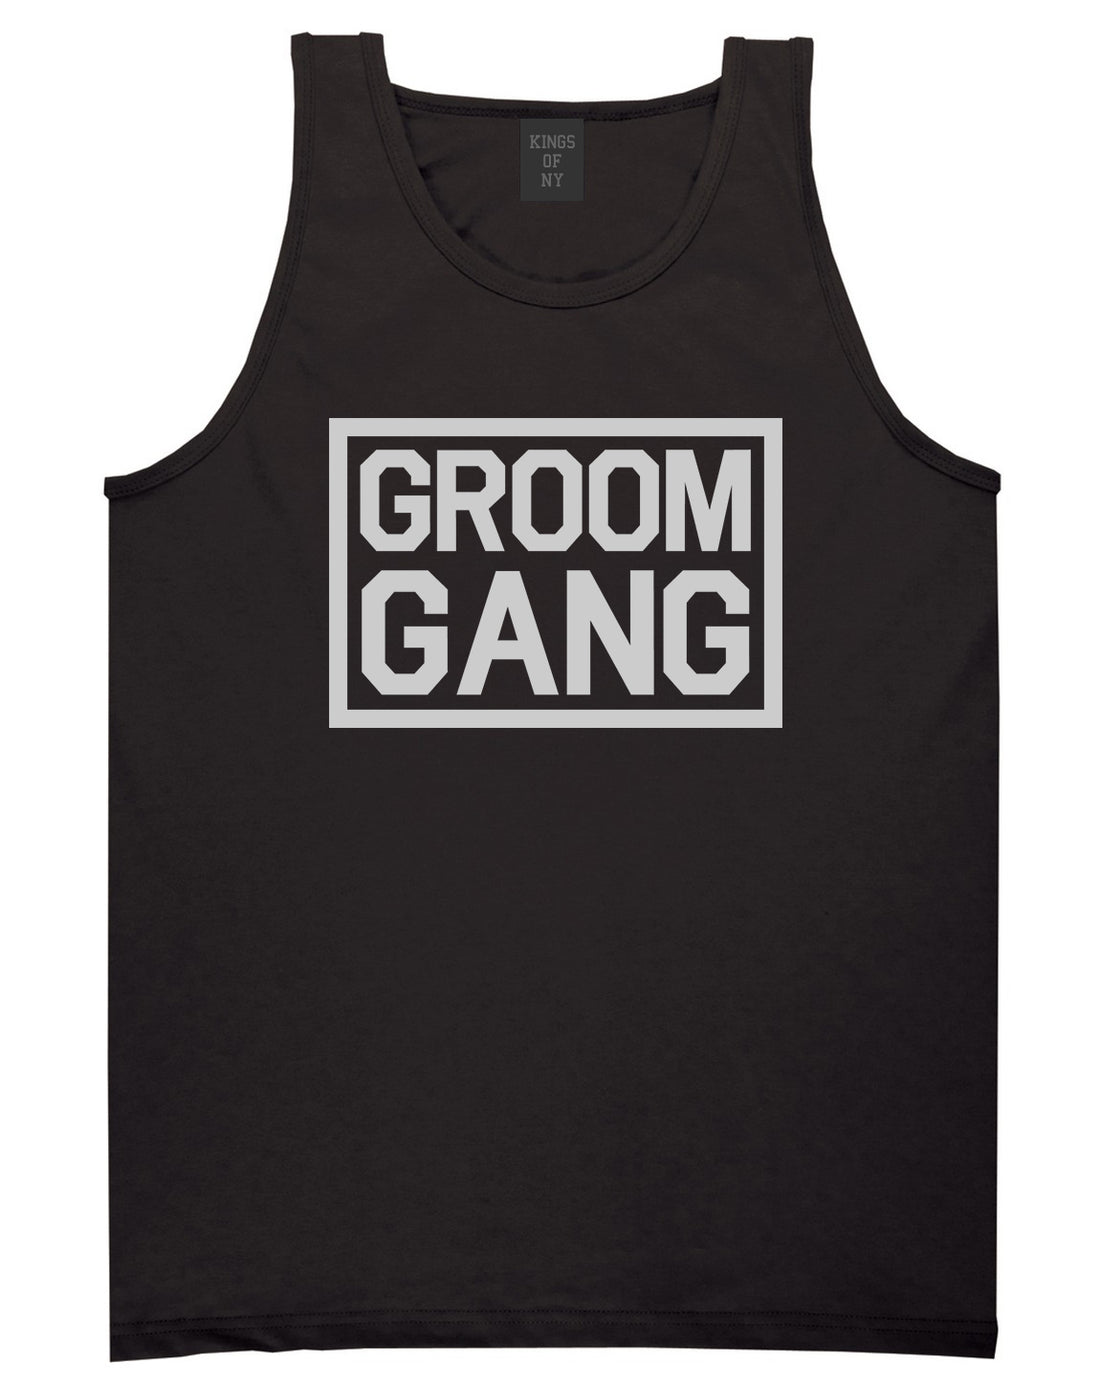 Groom Gang Bachelor Party Black Tank Top Shirt by Kings Of NY